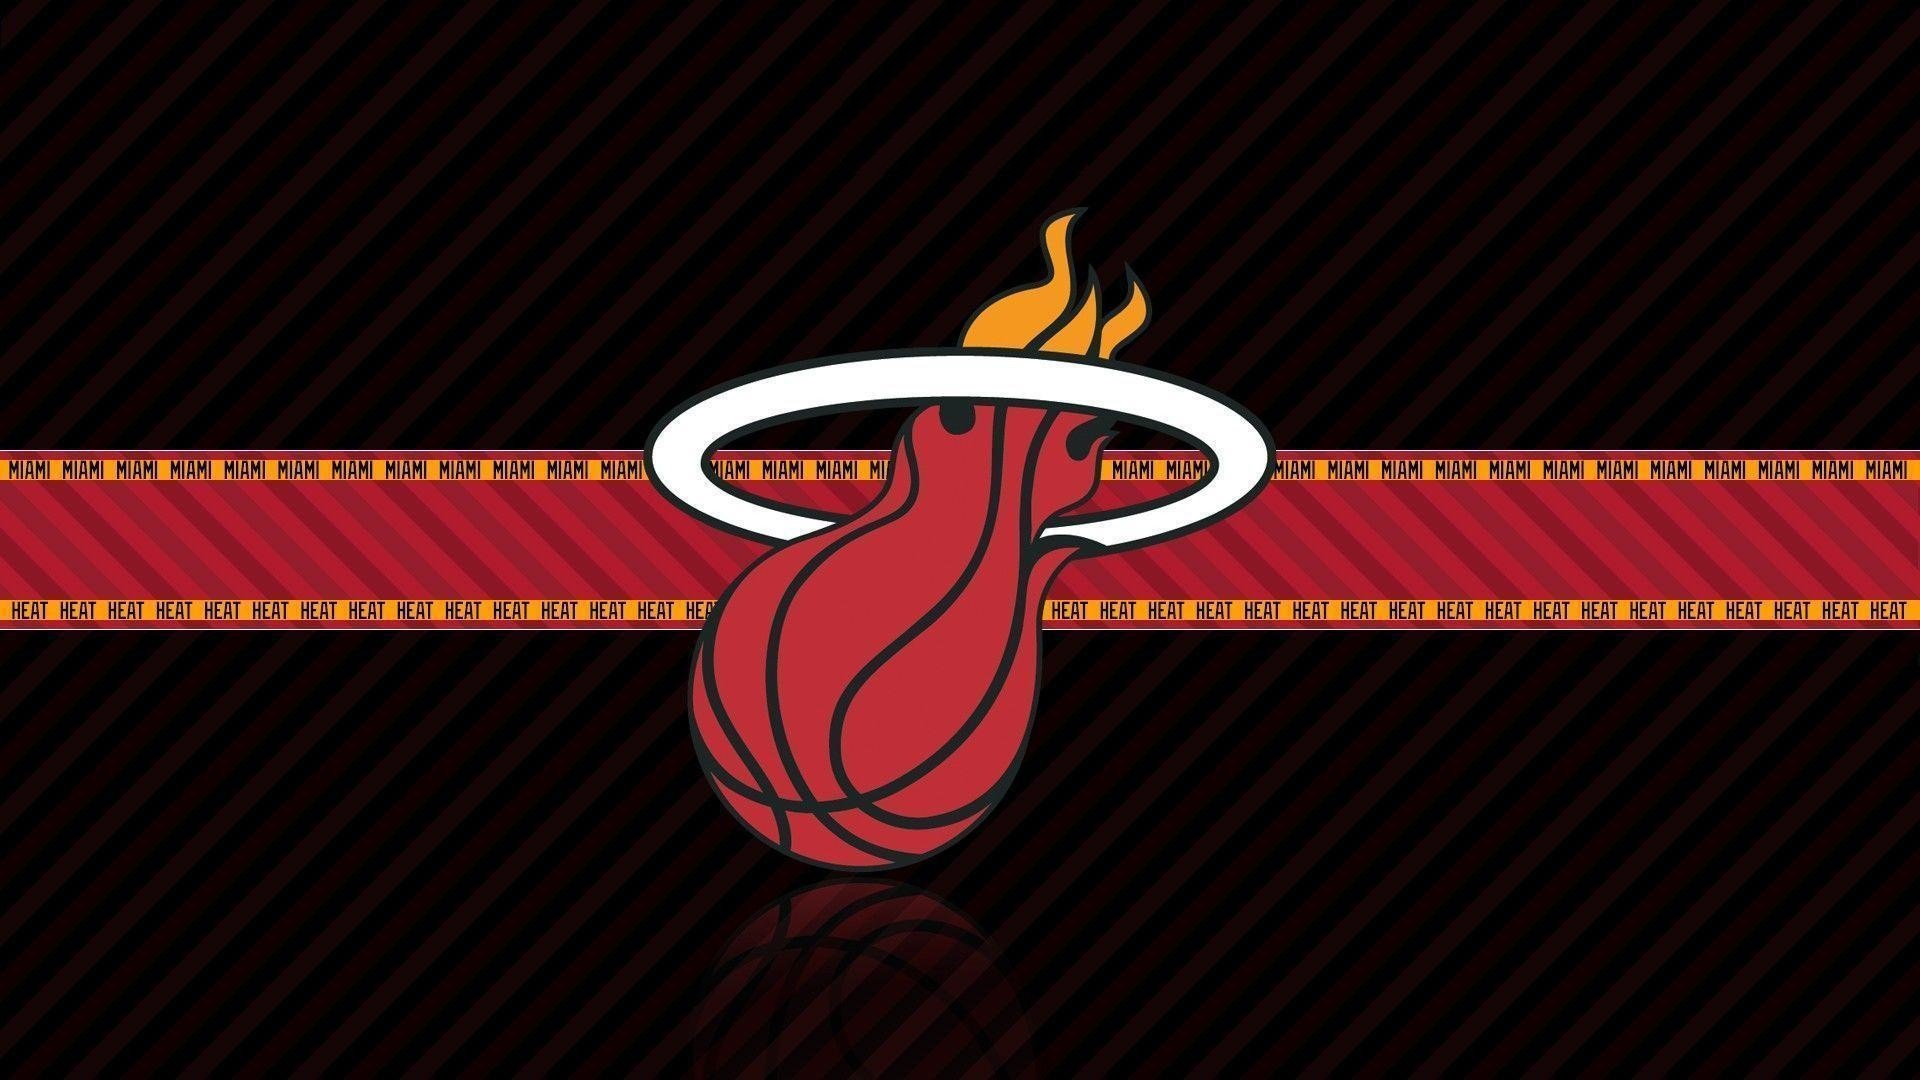 Hd Miami Heat Wallpapers With High-resolution Pixel - Miami Heat Wallpaper Hd Pc - HD Wallpaper 